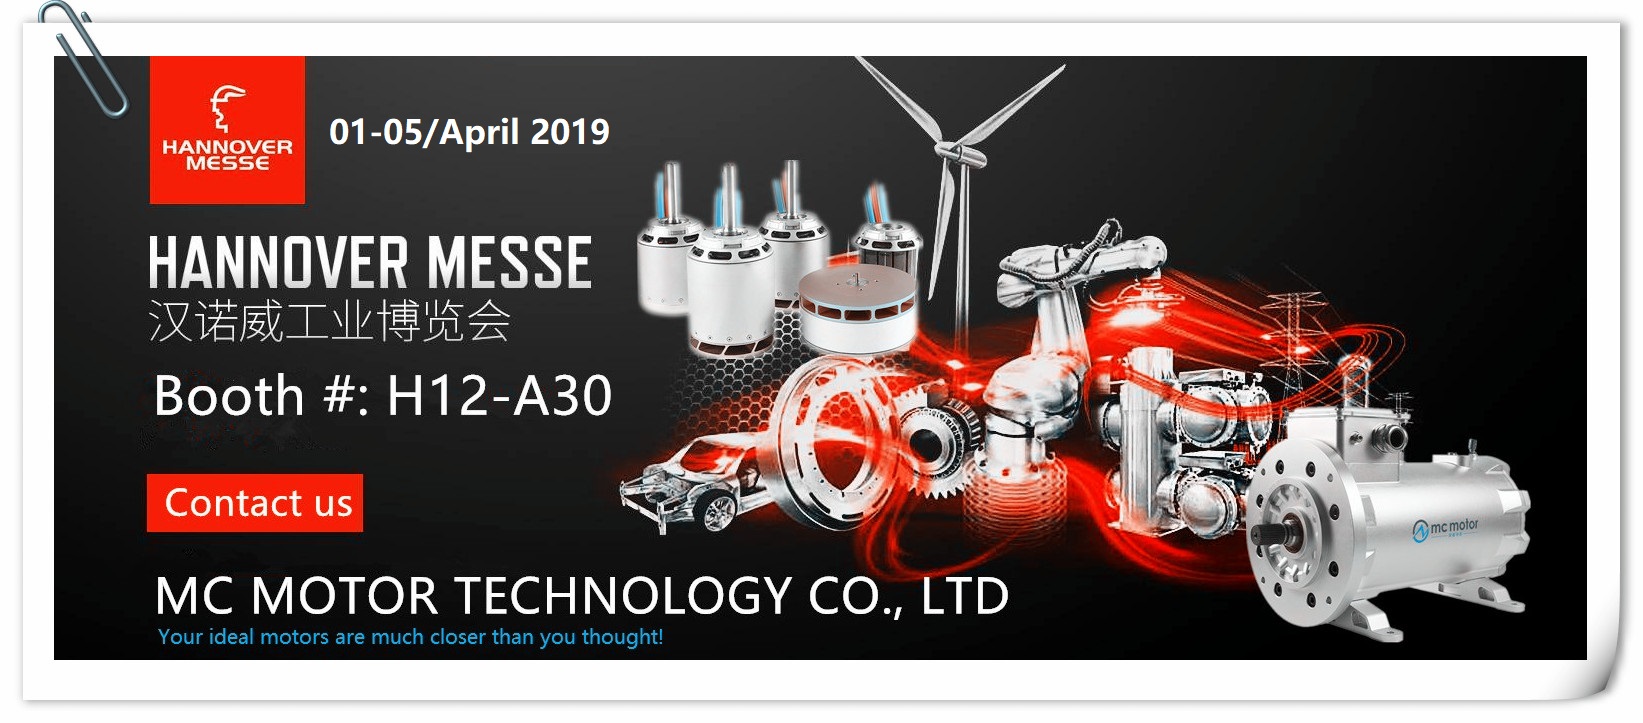 2019 HANNOVER MESSE